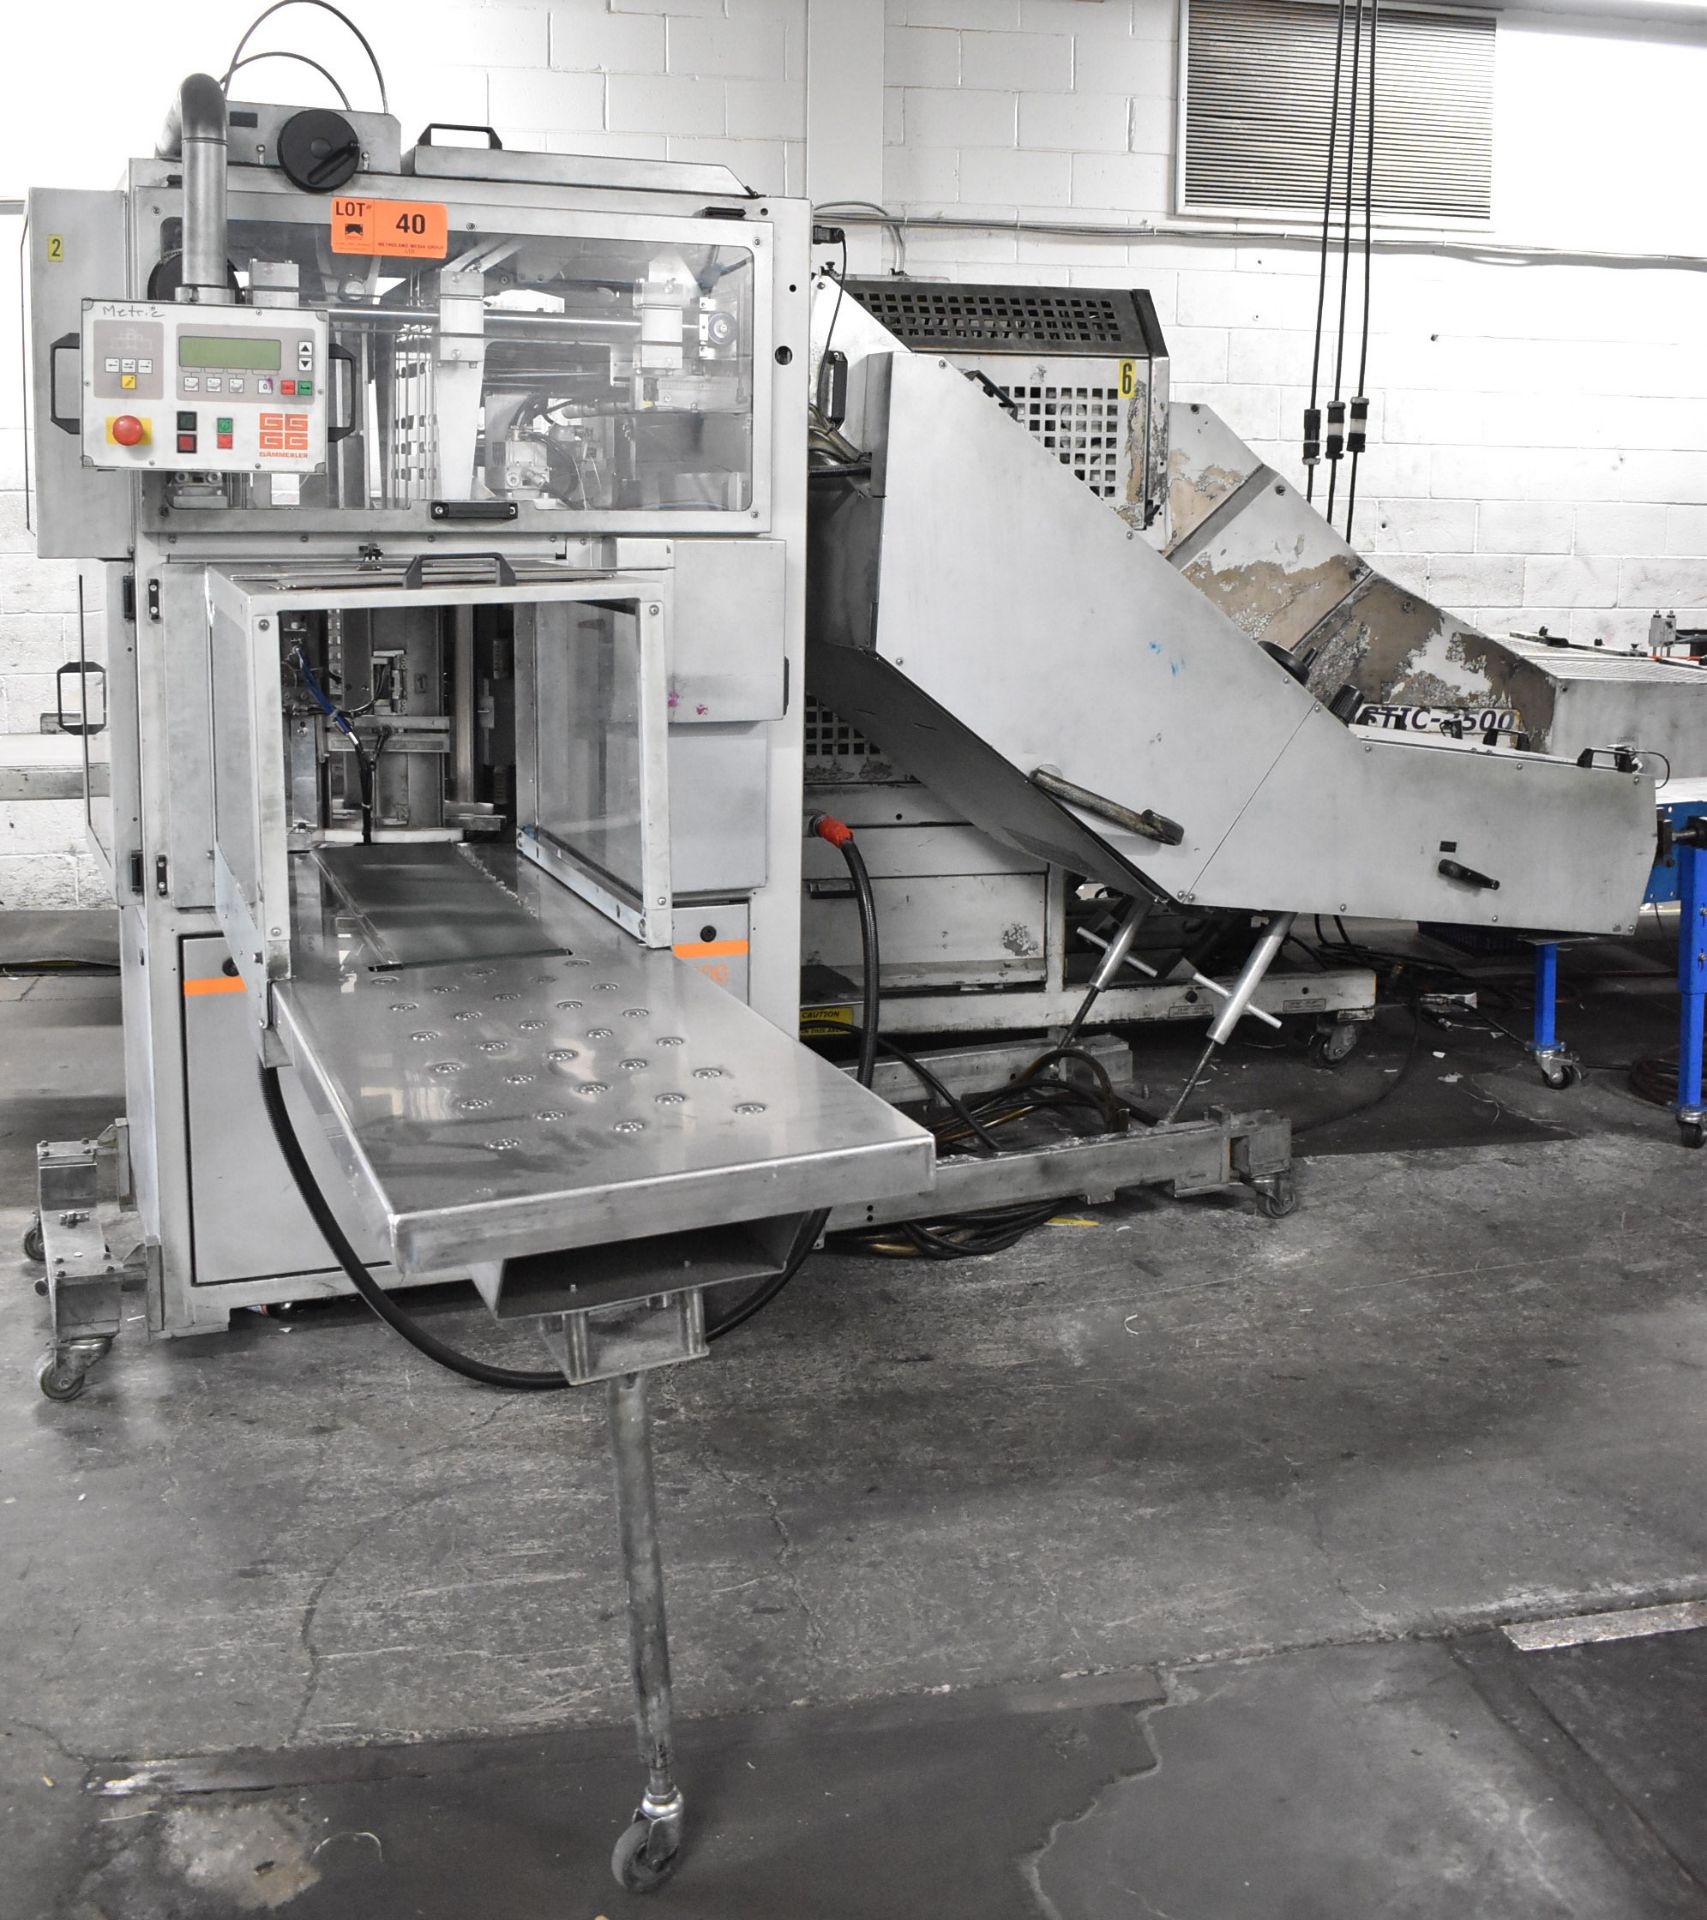 GAMMERLER STC-700 SINGLE CHAMBER COMPENSATING STACKER WITH GAMMERLER DIGITAL CONTROL, 19.7"X13" MAX.